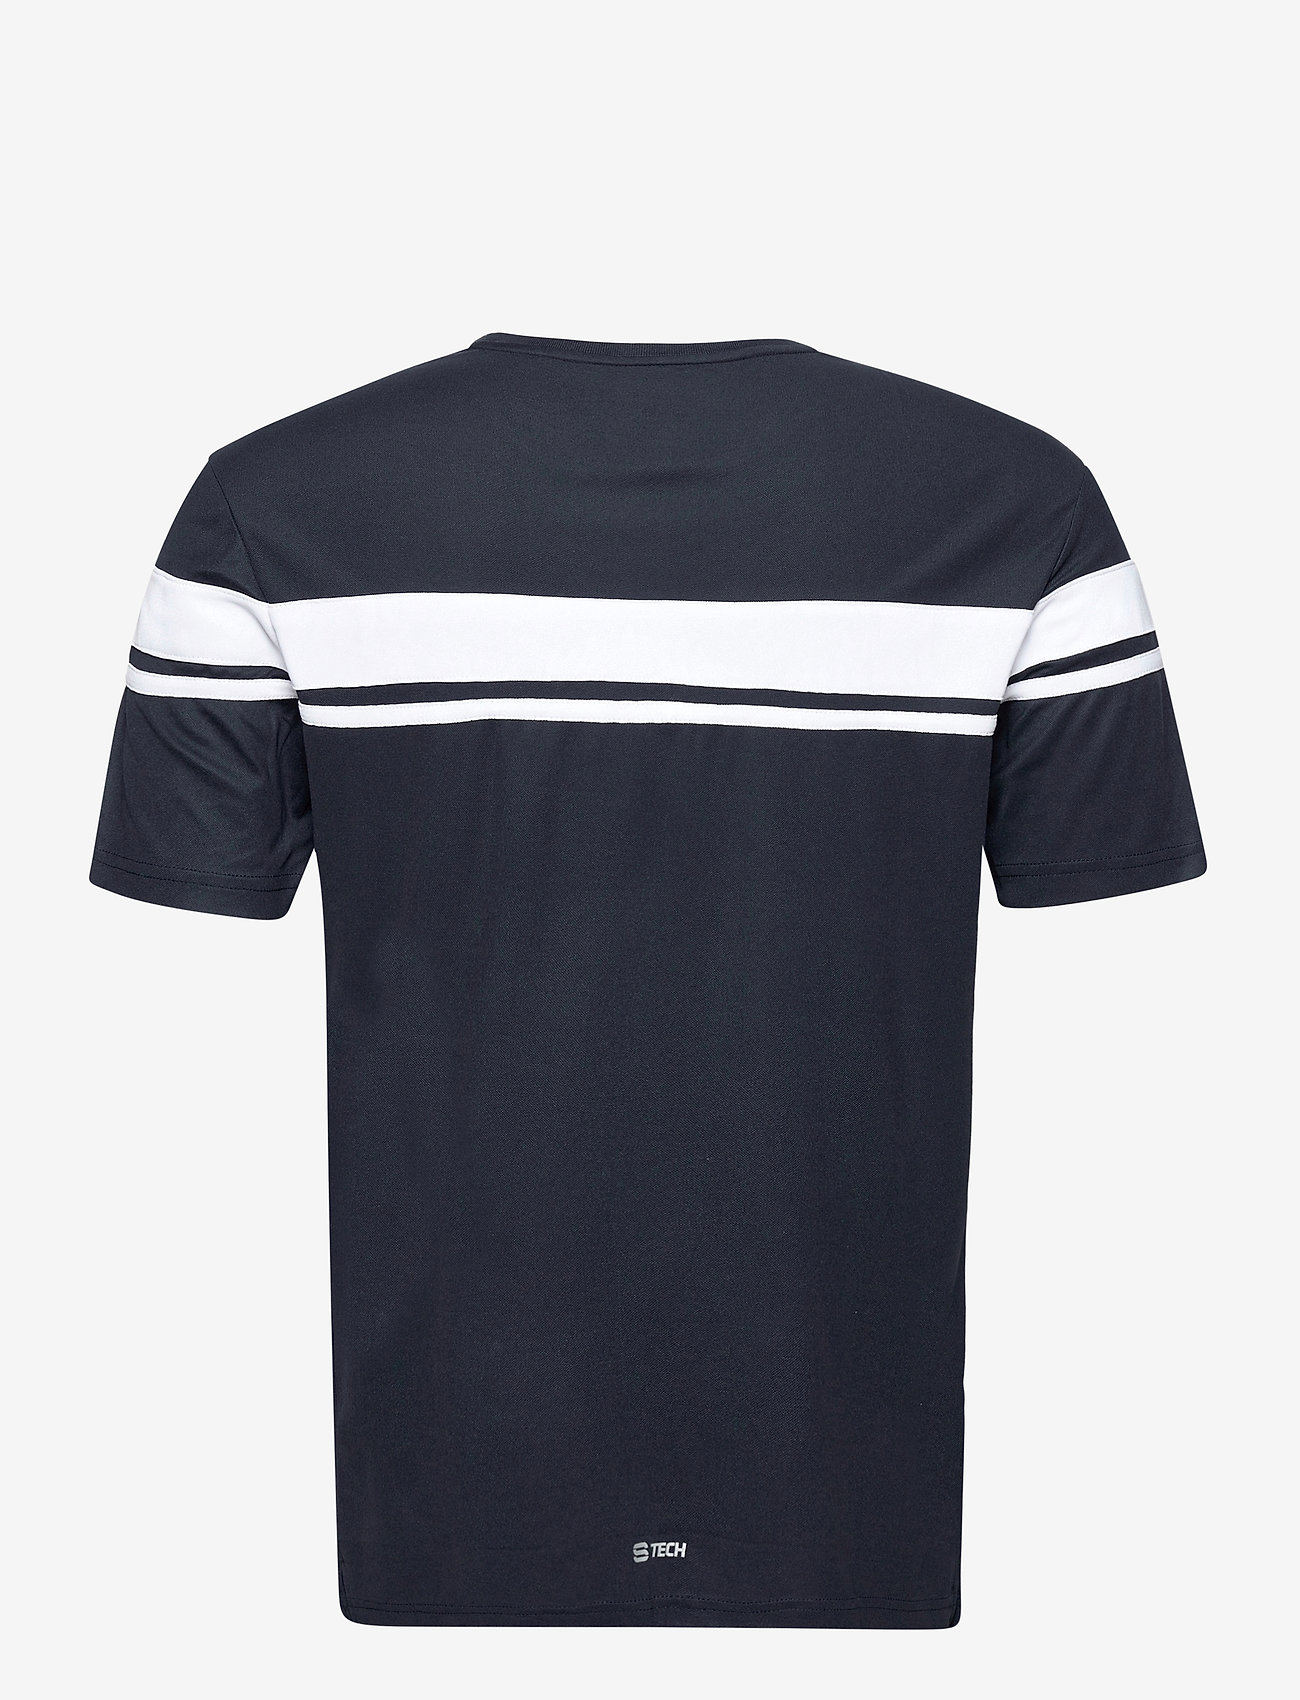 Sergio Tacchini - YOUNG LINE PRO T-SHIRT - t-shirts med print - navy/white - 1